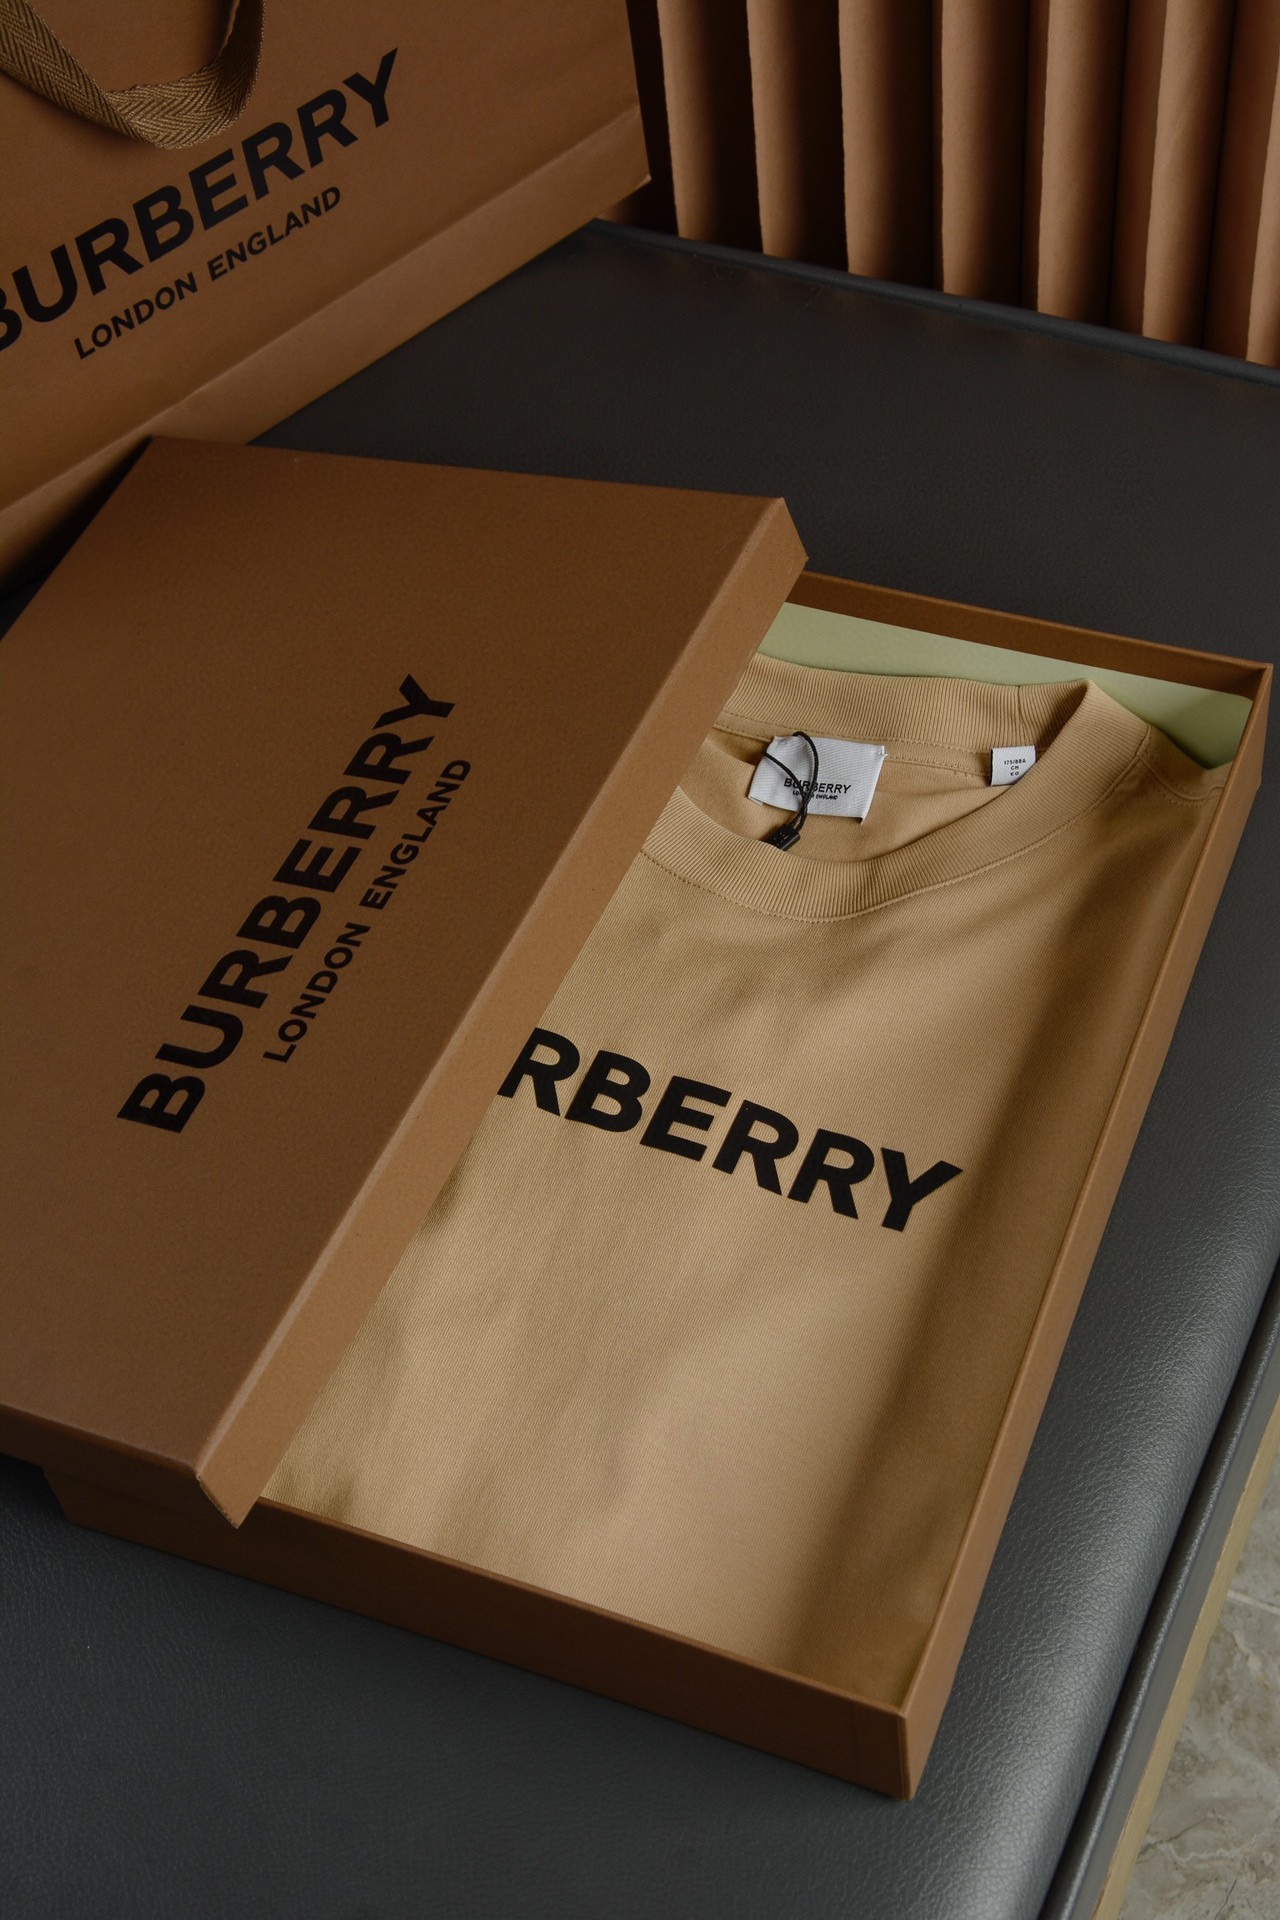 Burberry New
 Clothing T-Shirt Buy First Copy Replica
 Cotton Spring/Summer Collection Short Sleeve